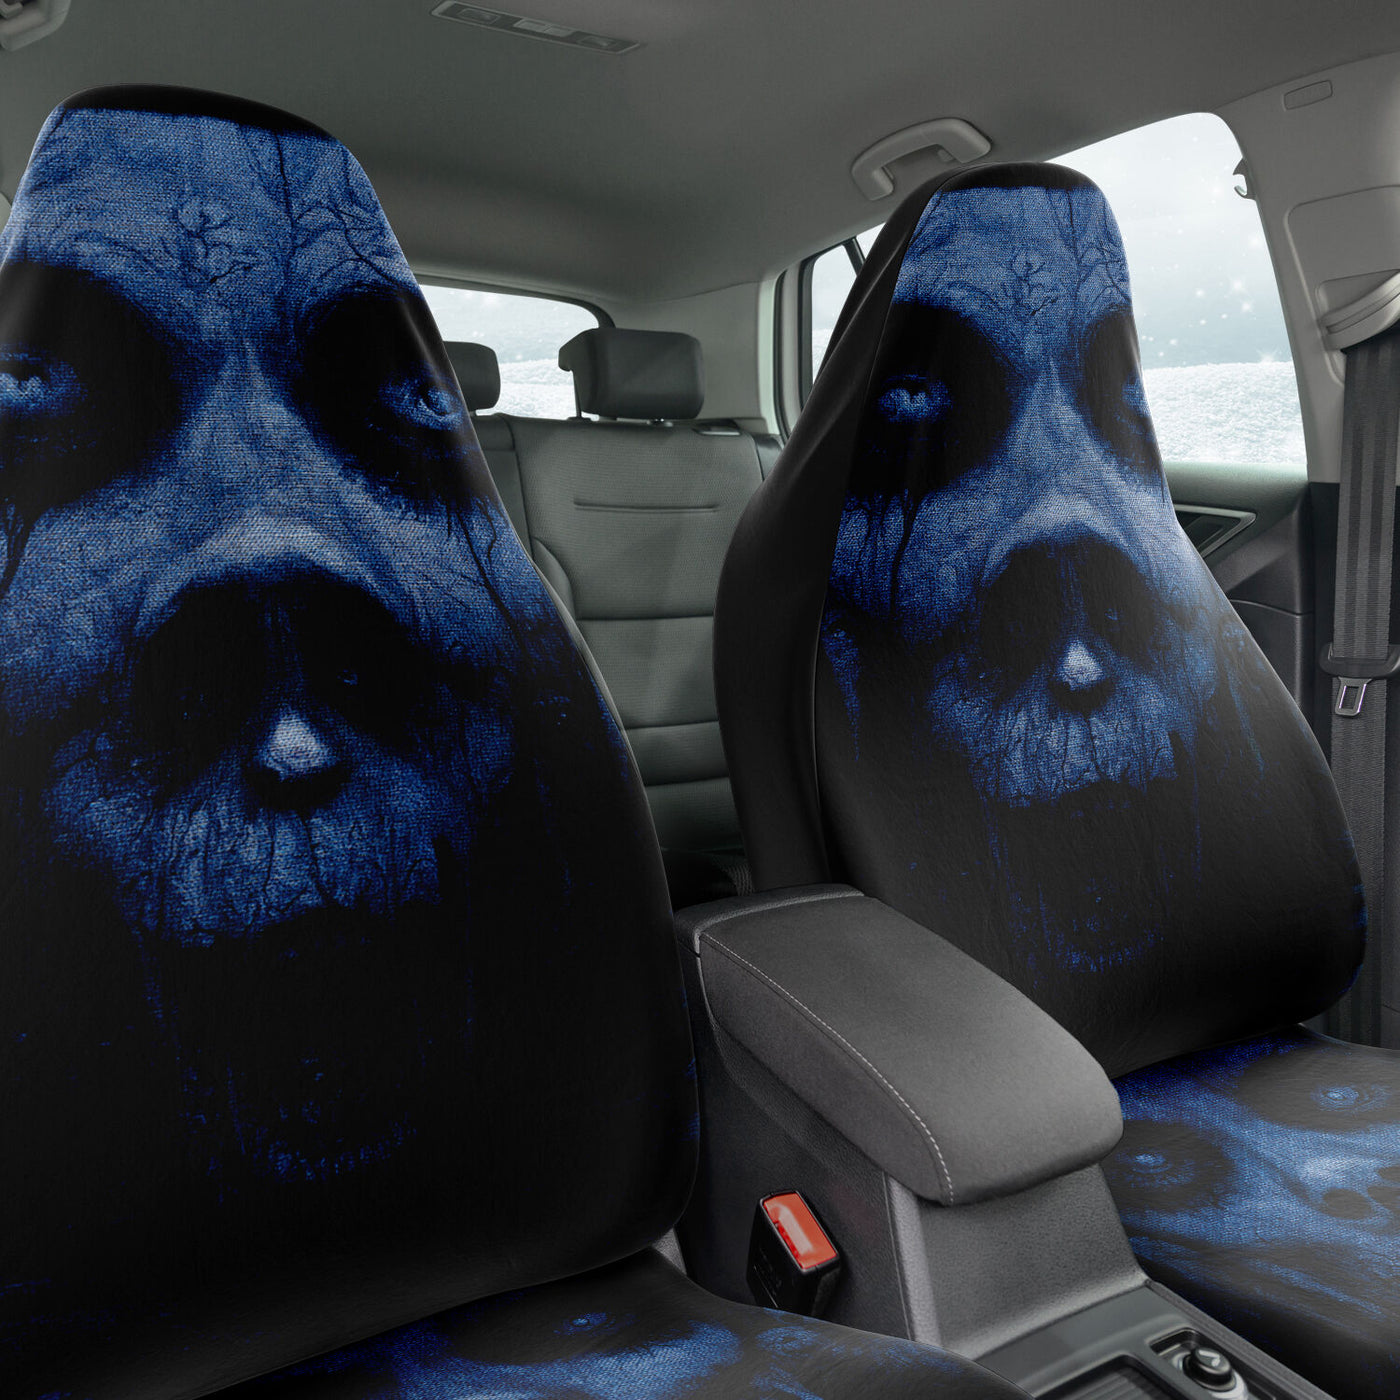 Dark Slate Gray Hells Mouth Blue Gothic Art | Car Seat Covers